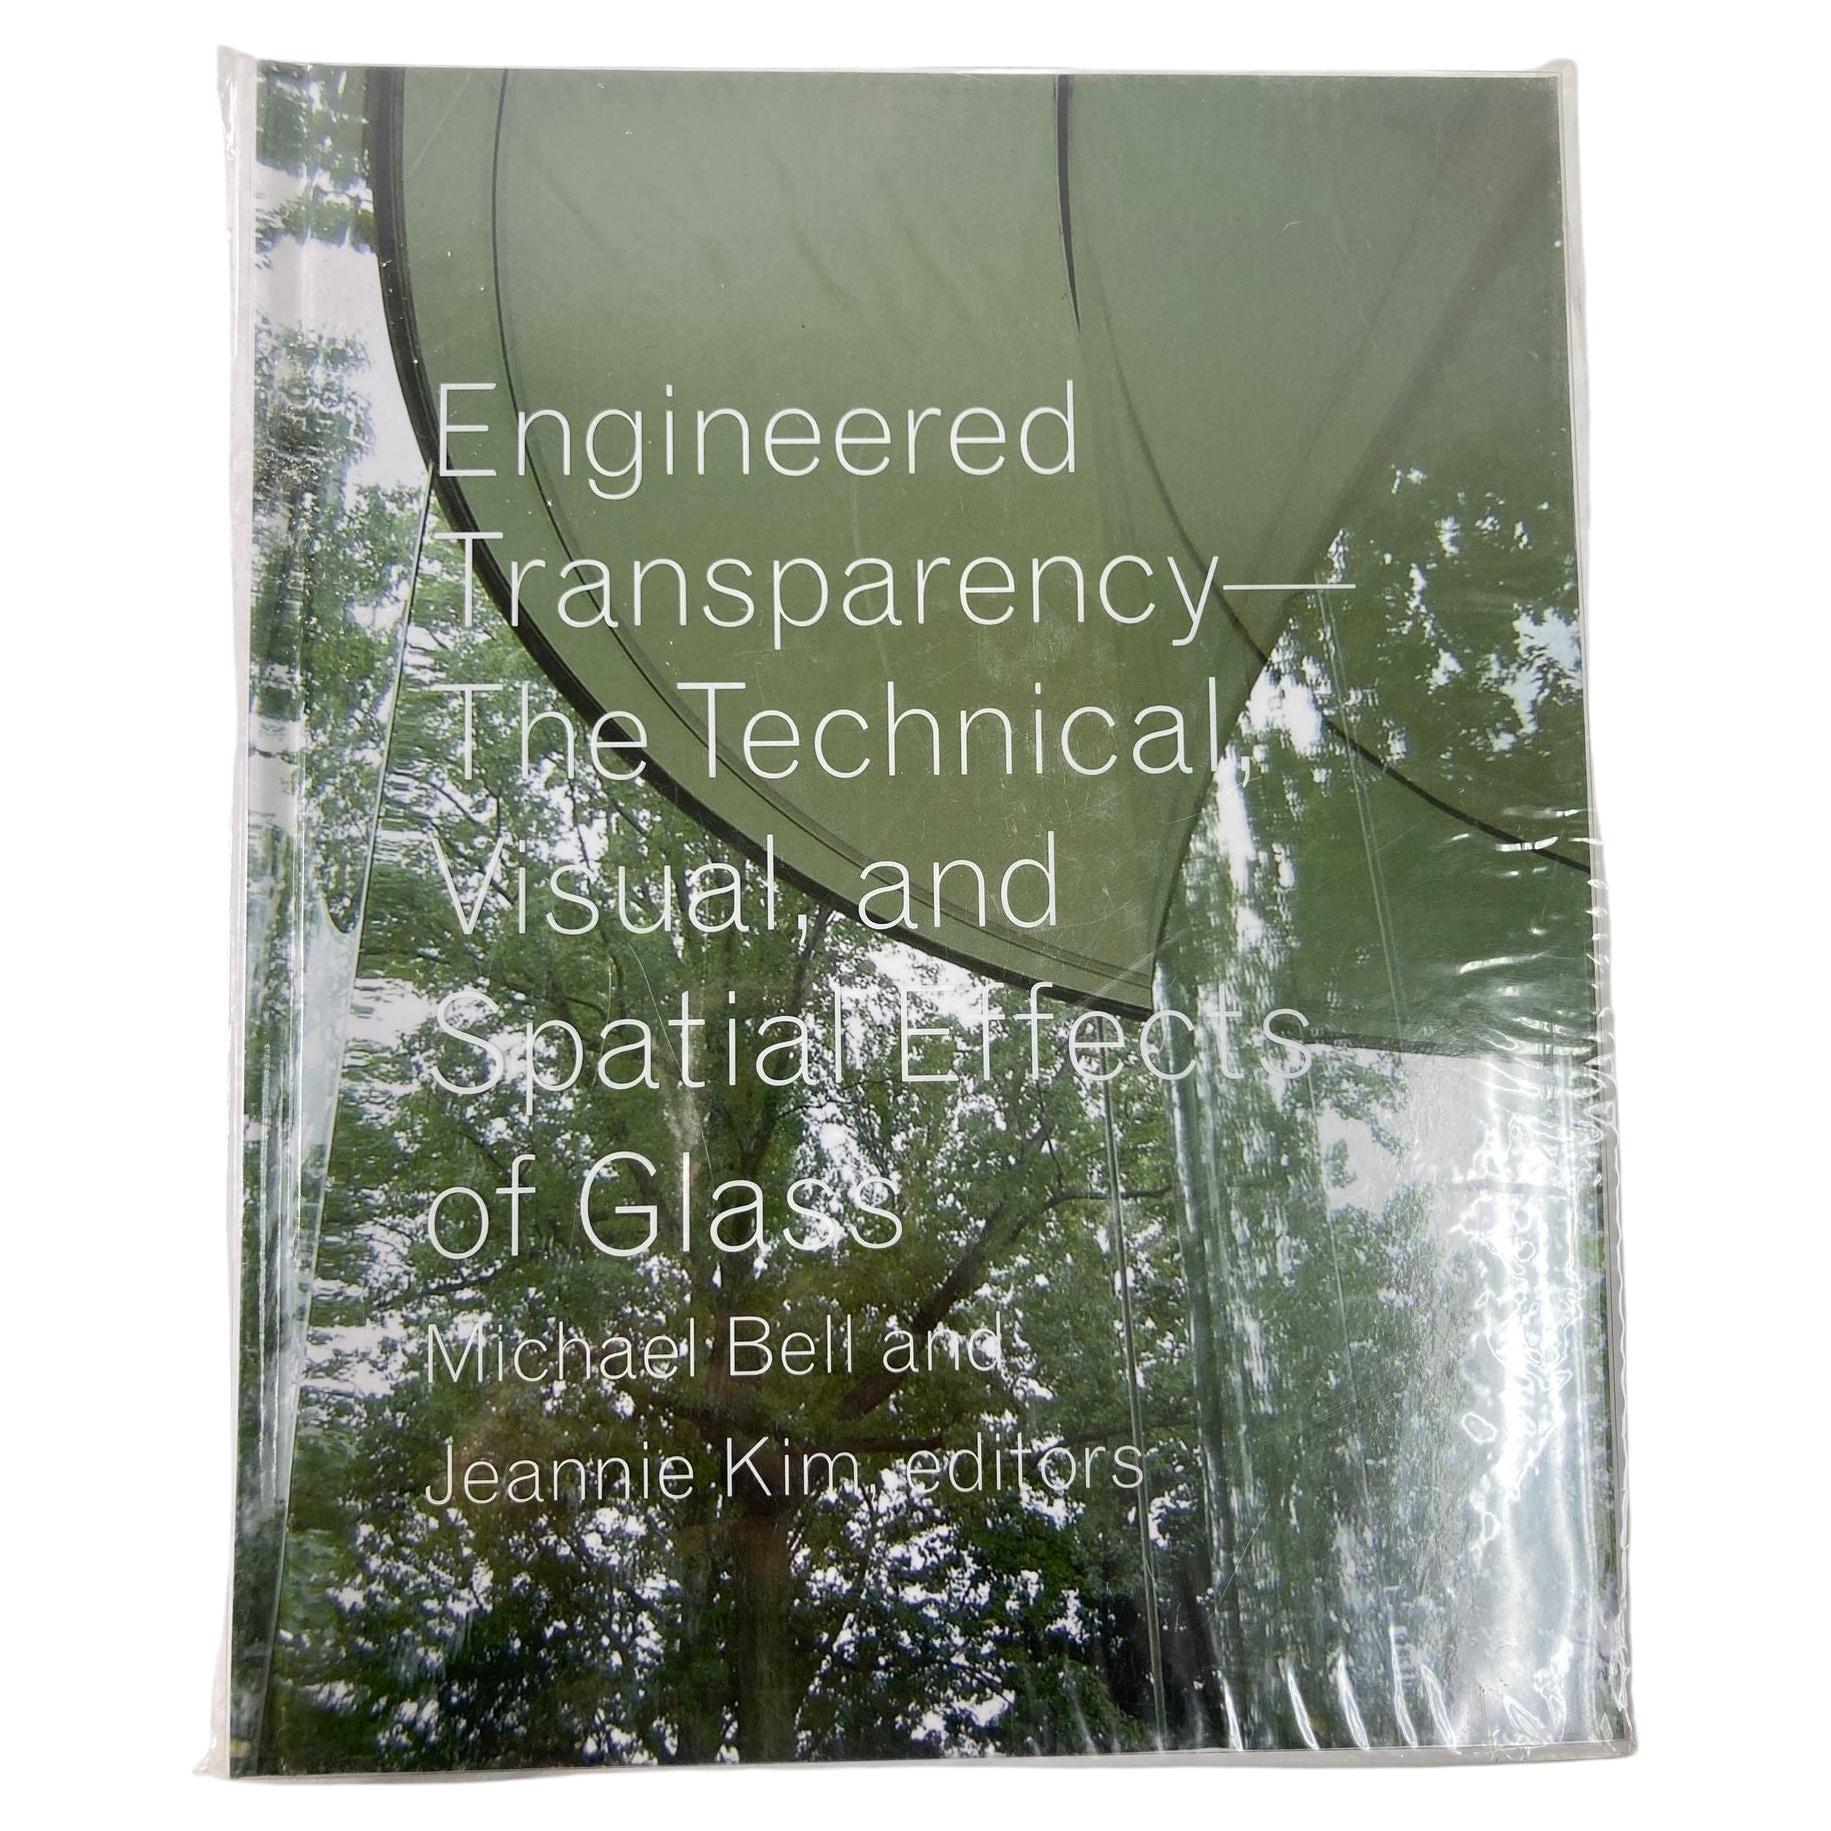 Engineered Transparency the Technical, Visual, and Spatial Effects of Glass Book